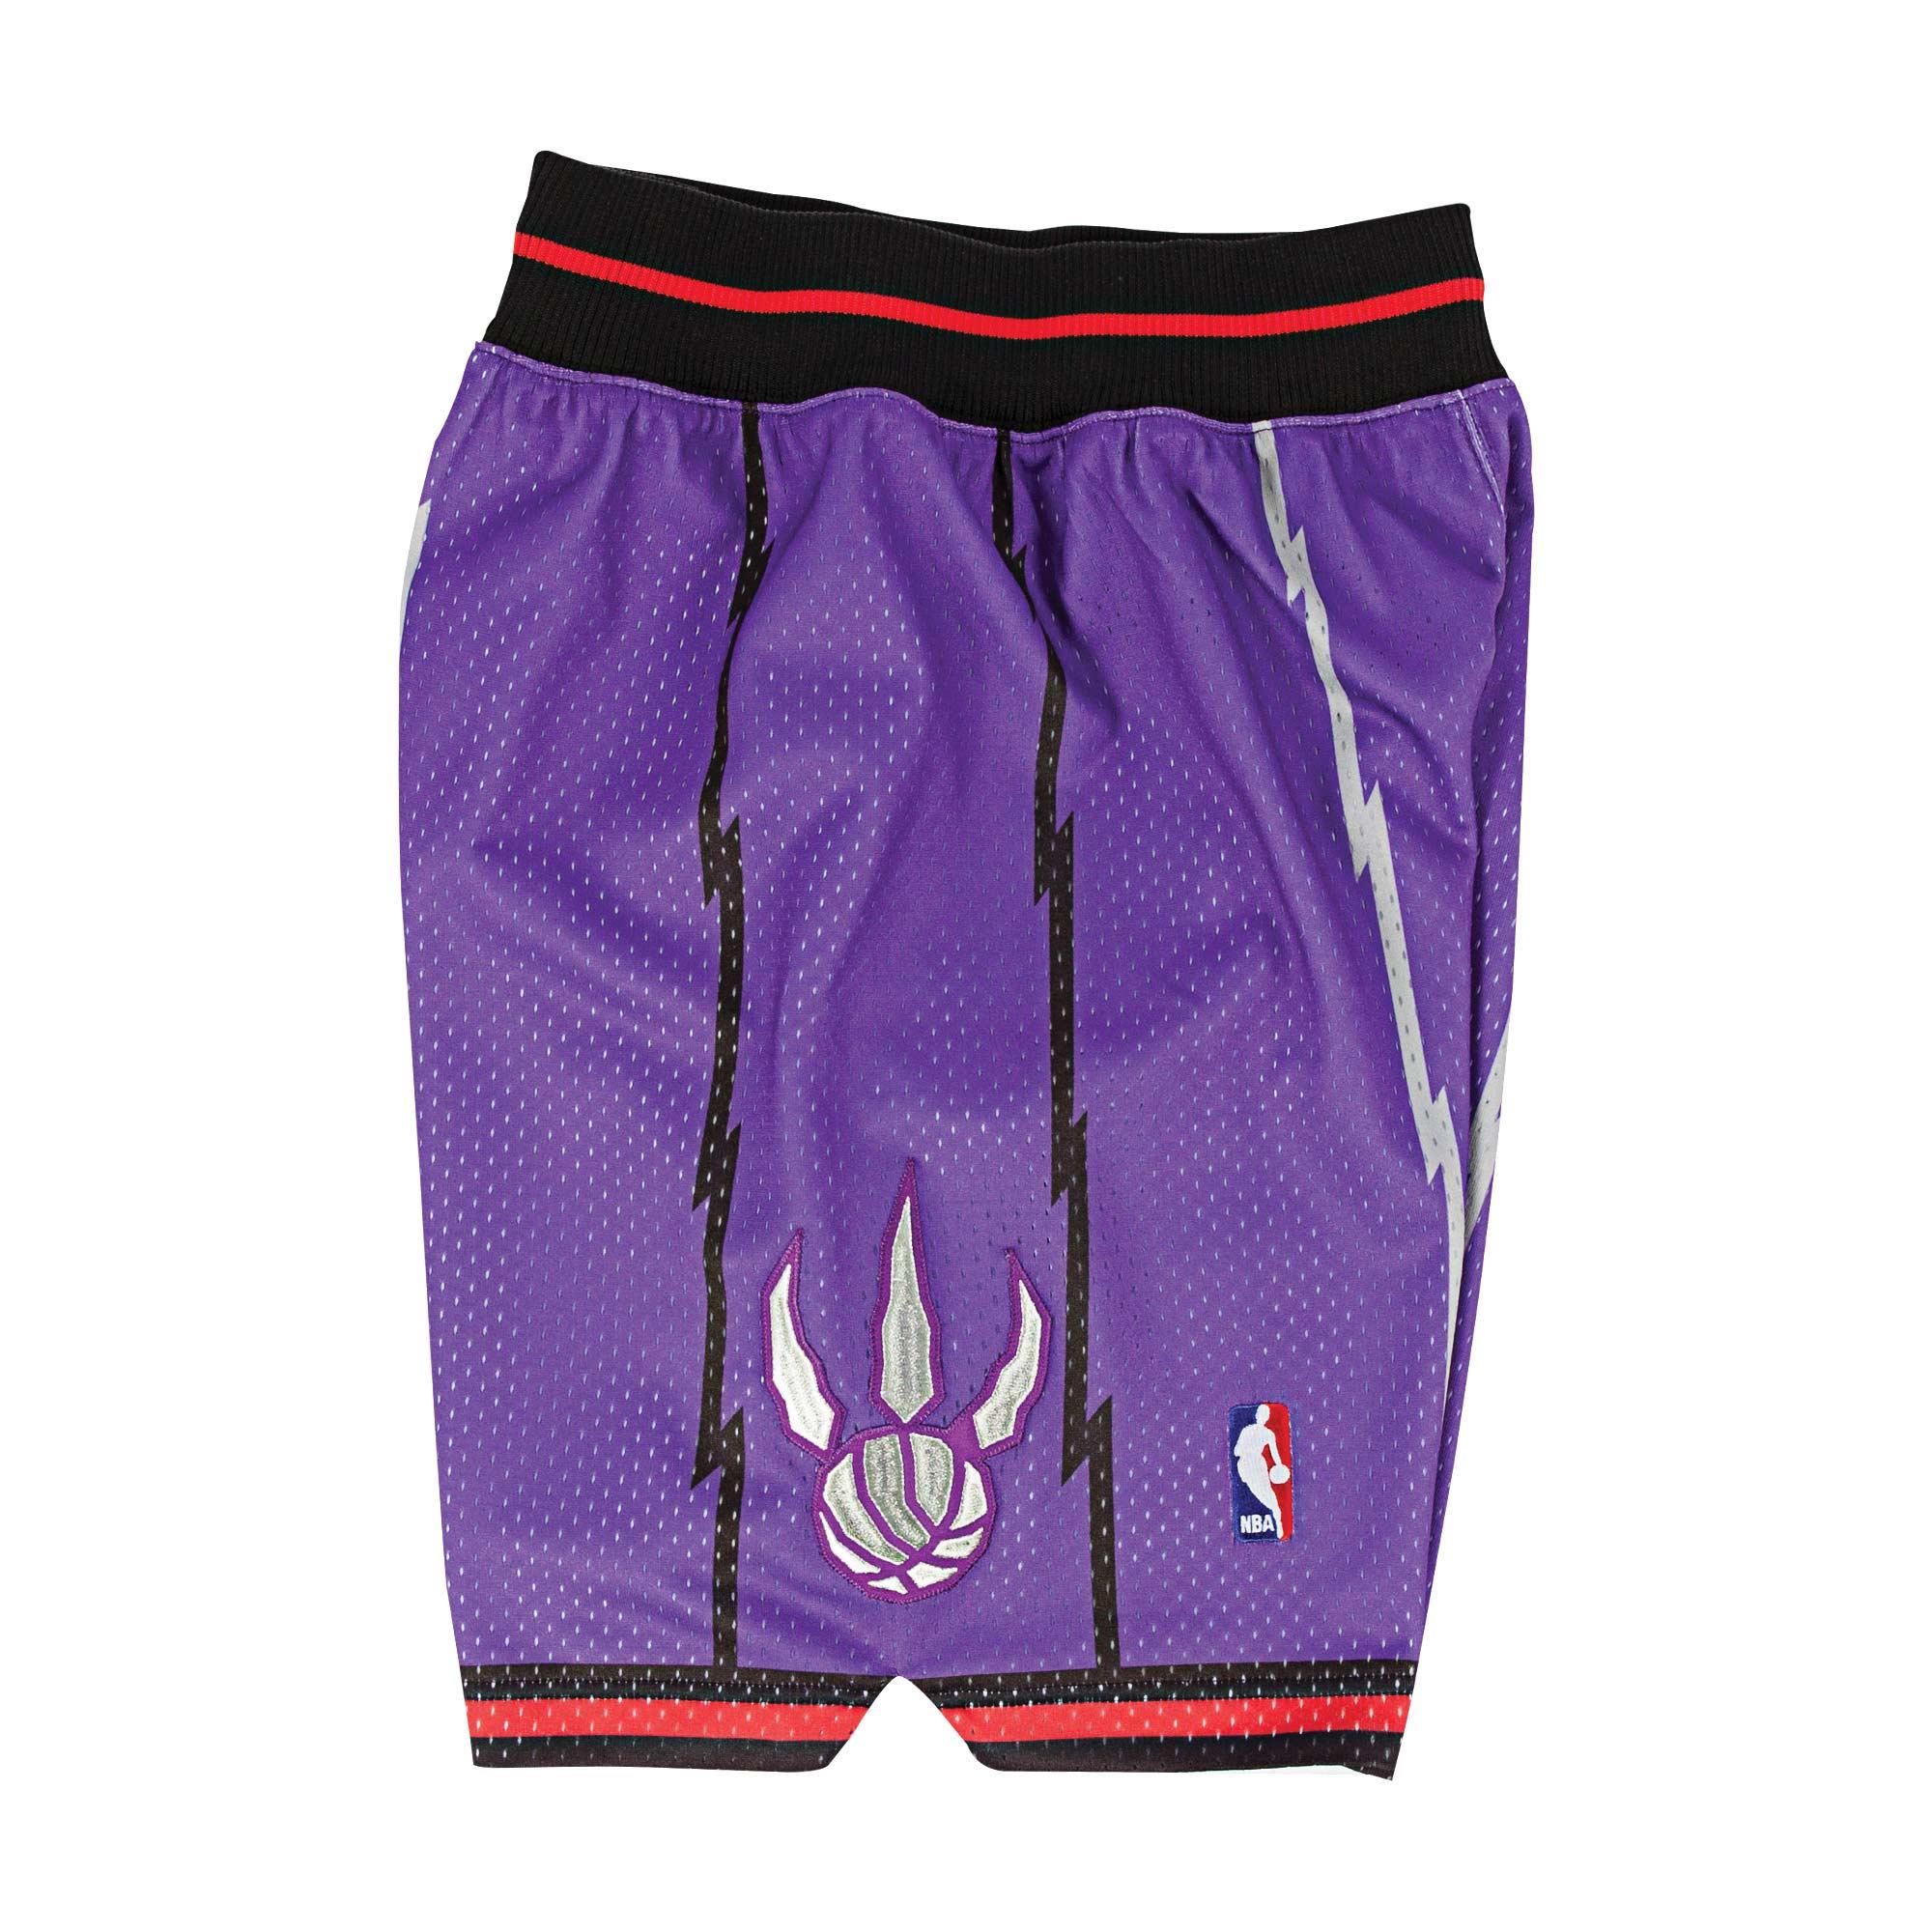 Mitchell & Ness on X: You ask, we listen. W H I T E @chicagobulls  Authentic Shorts are now in stock at  --- Tweet us  what other Authentic @nba Shorts you'd